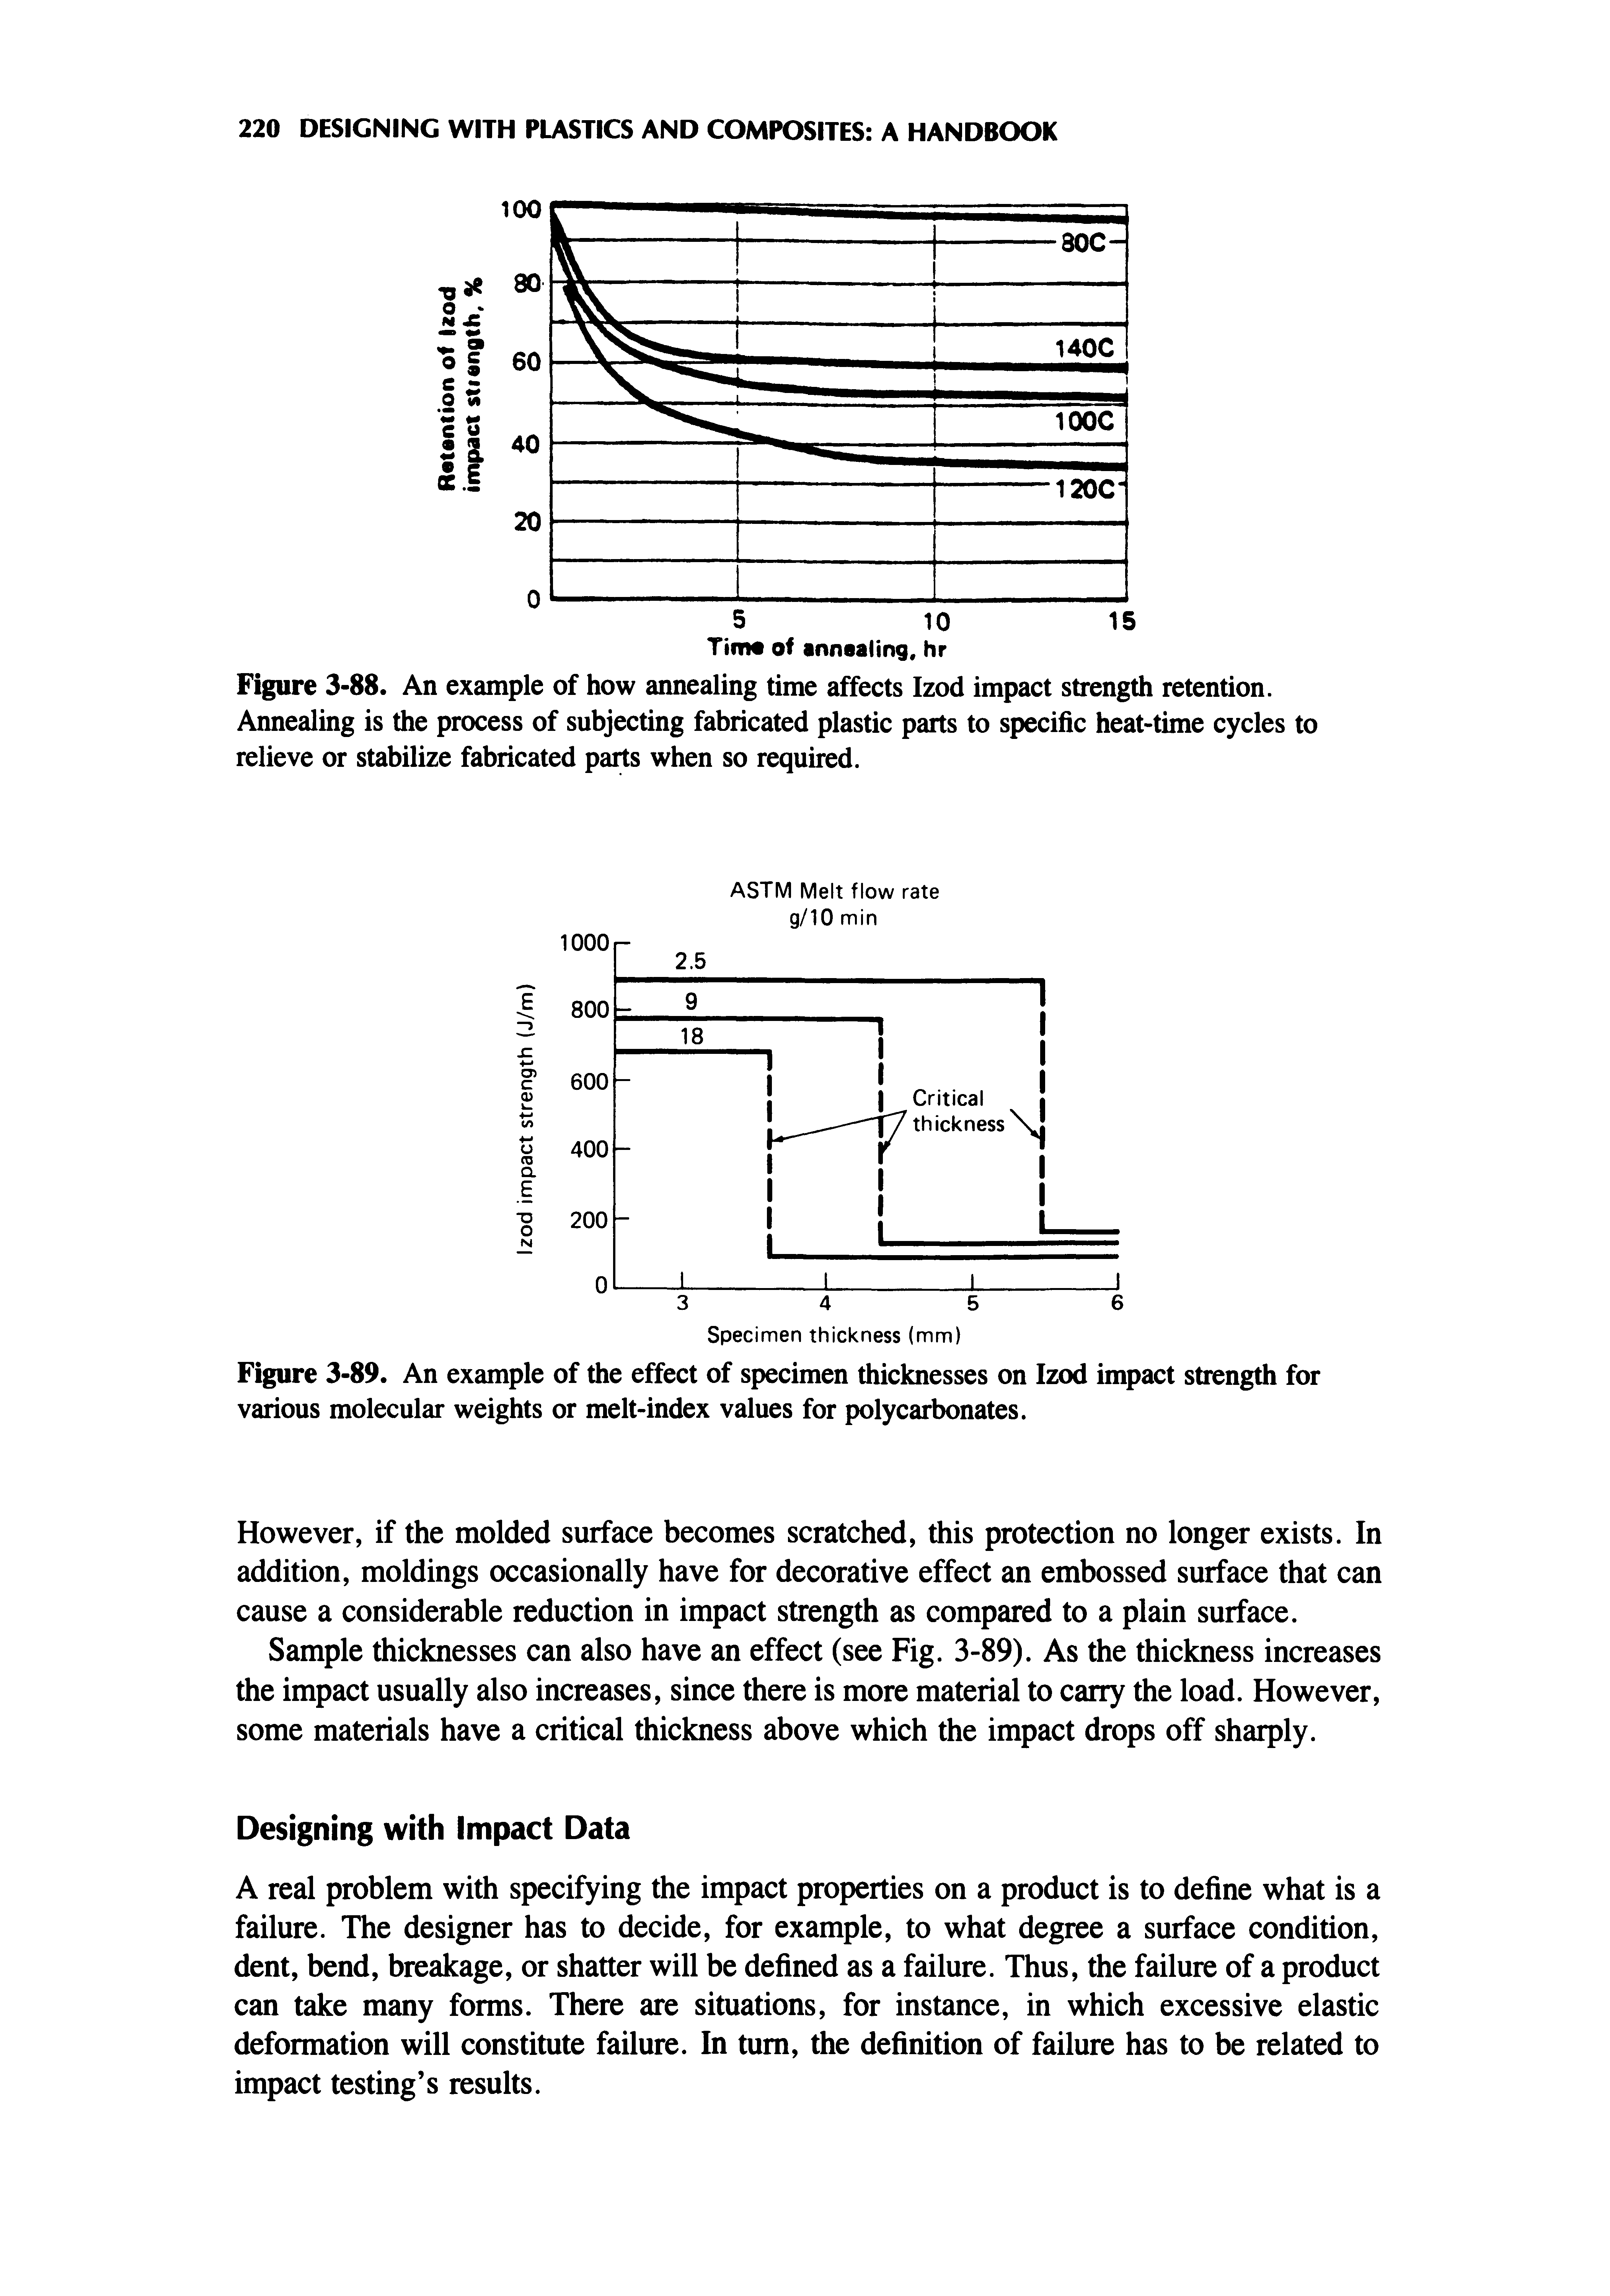 Figure 3-88. An example of how annealing time affects Izod impact strength retention. Annealing is the process of subjecting fabricated plastic parts to specific heat-time cycles to relieve or stabilize fabricated parts when so required.